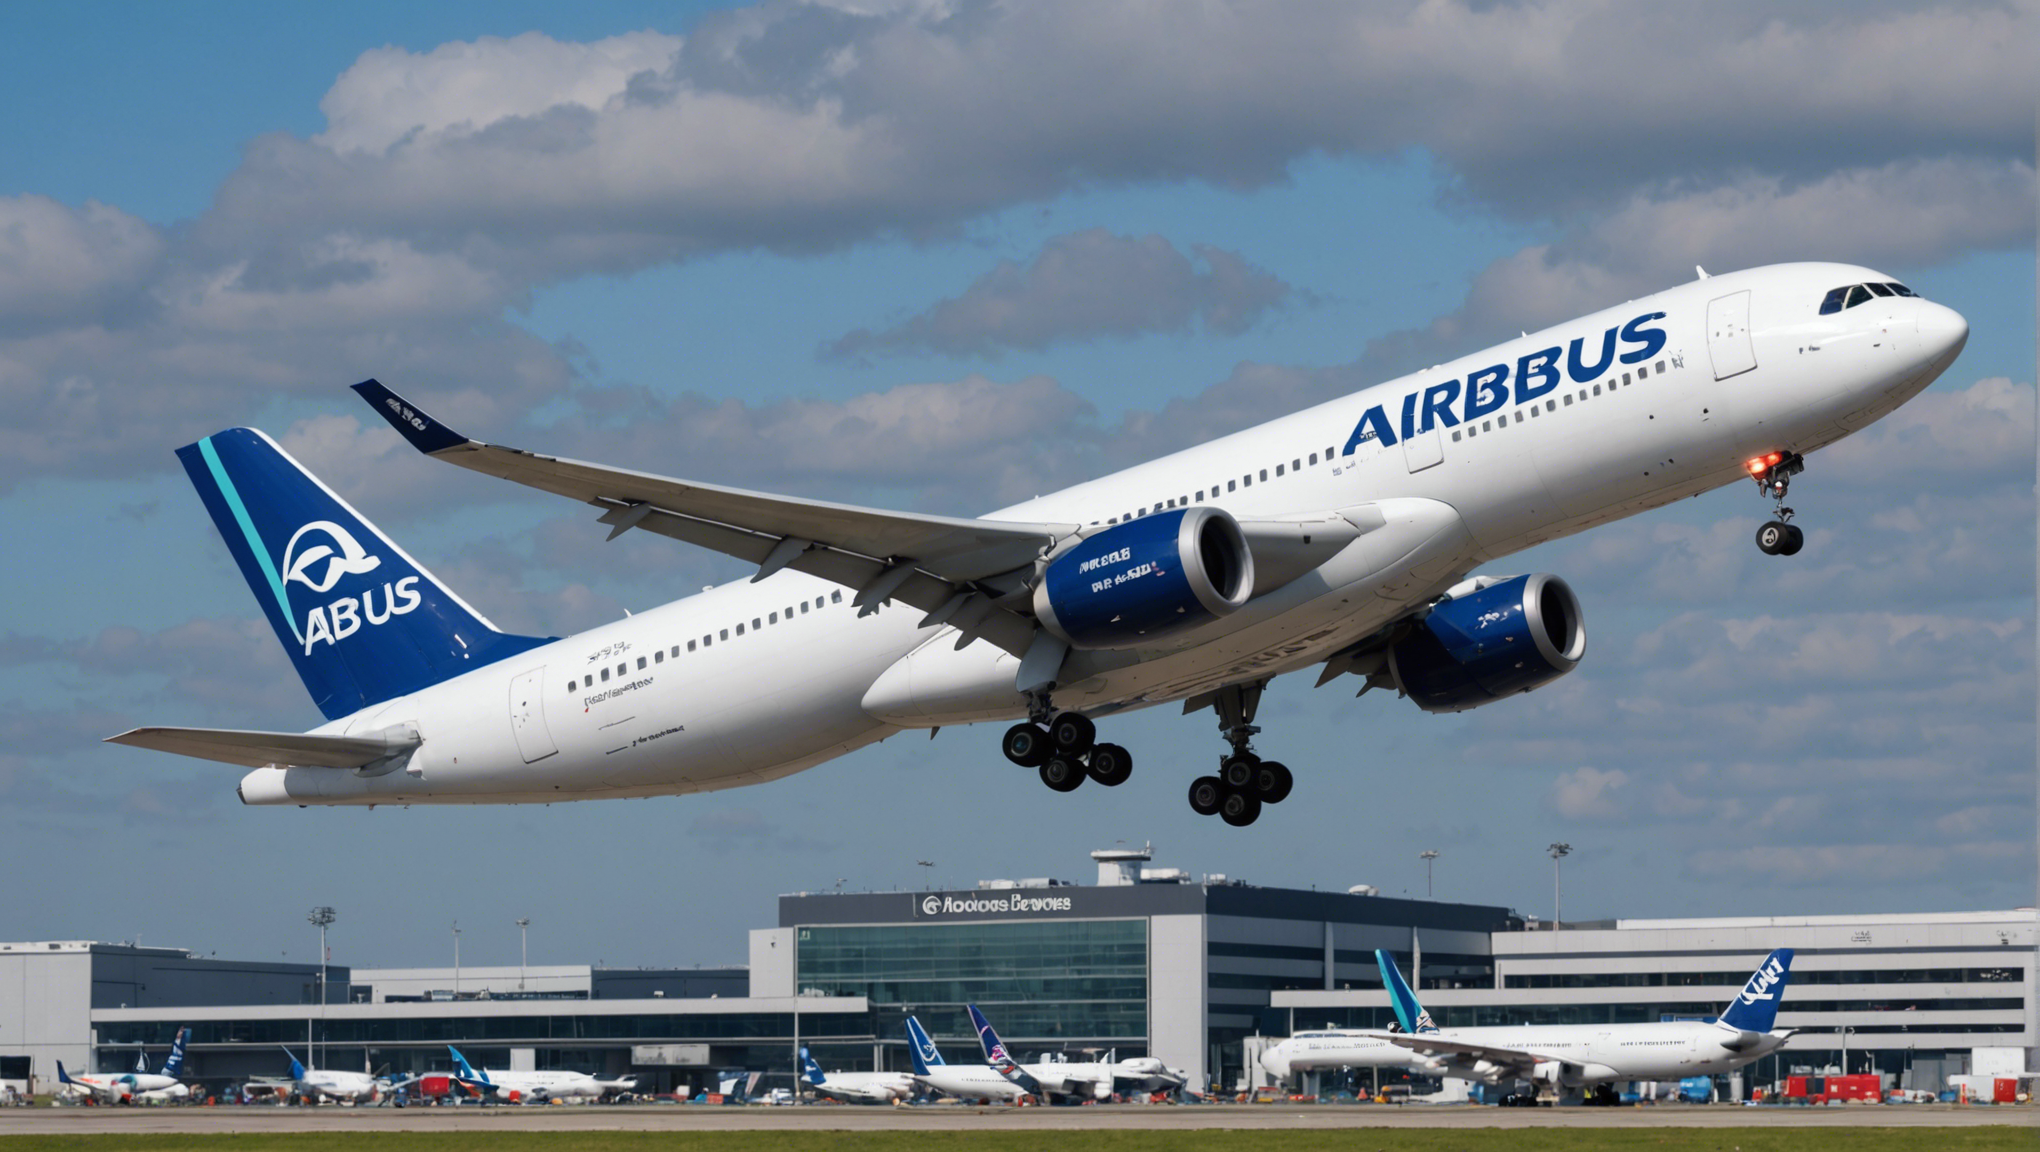 airbus revises its commercial aircraft delivery forecasts downwards. find out what this means for the aeronautics industry.